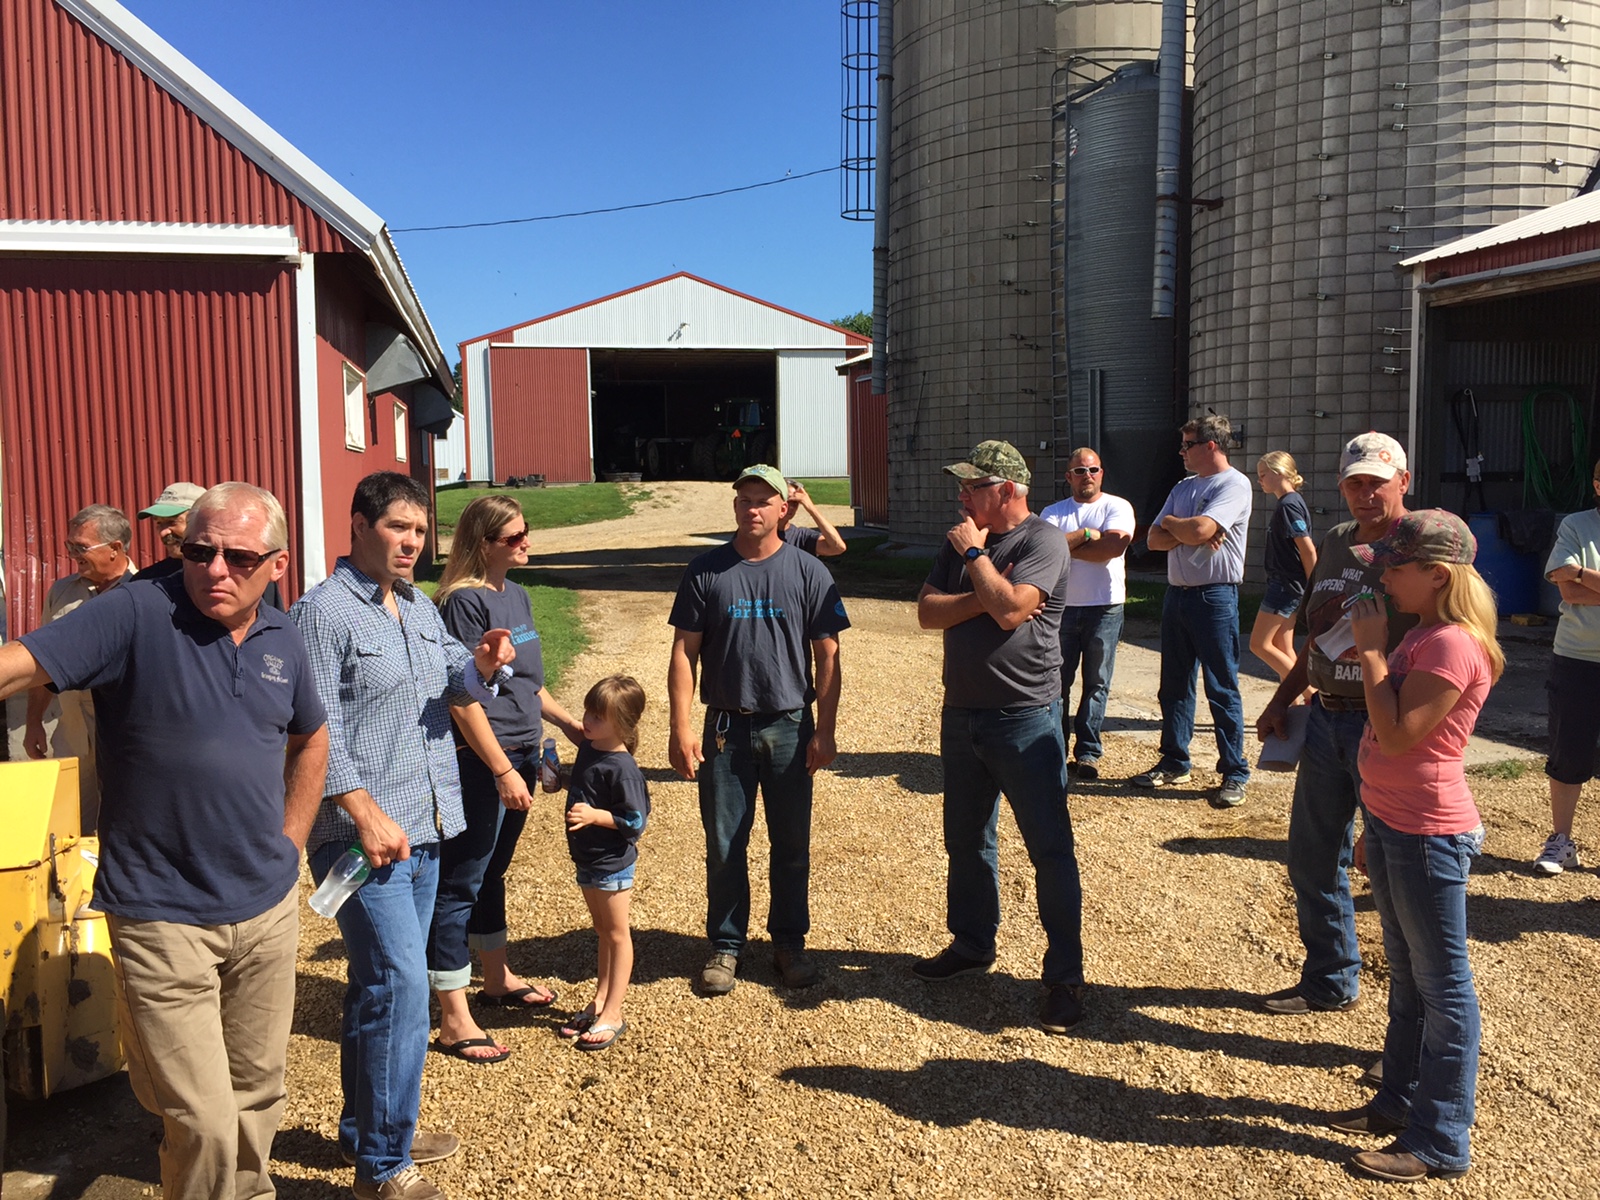 Veterans and Agriculture: An Opportunity to Revitalize Farming